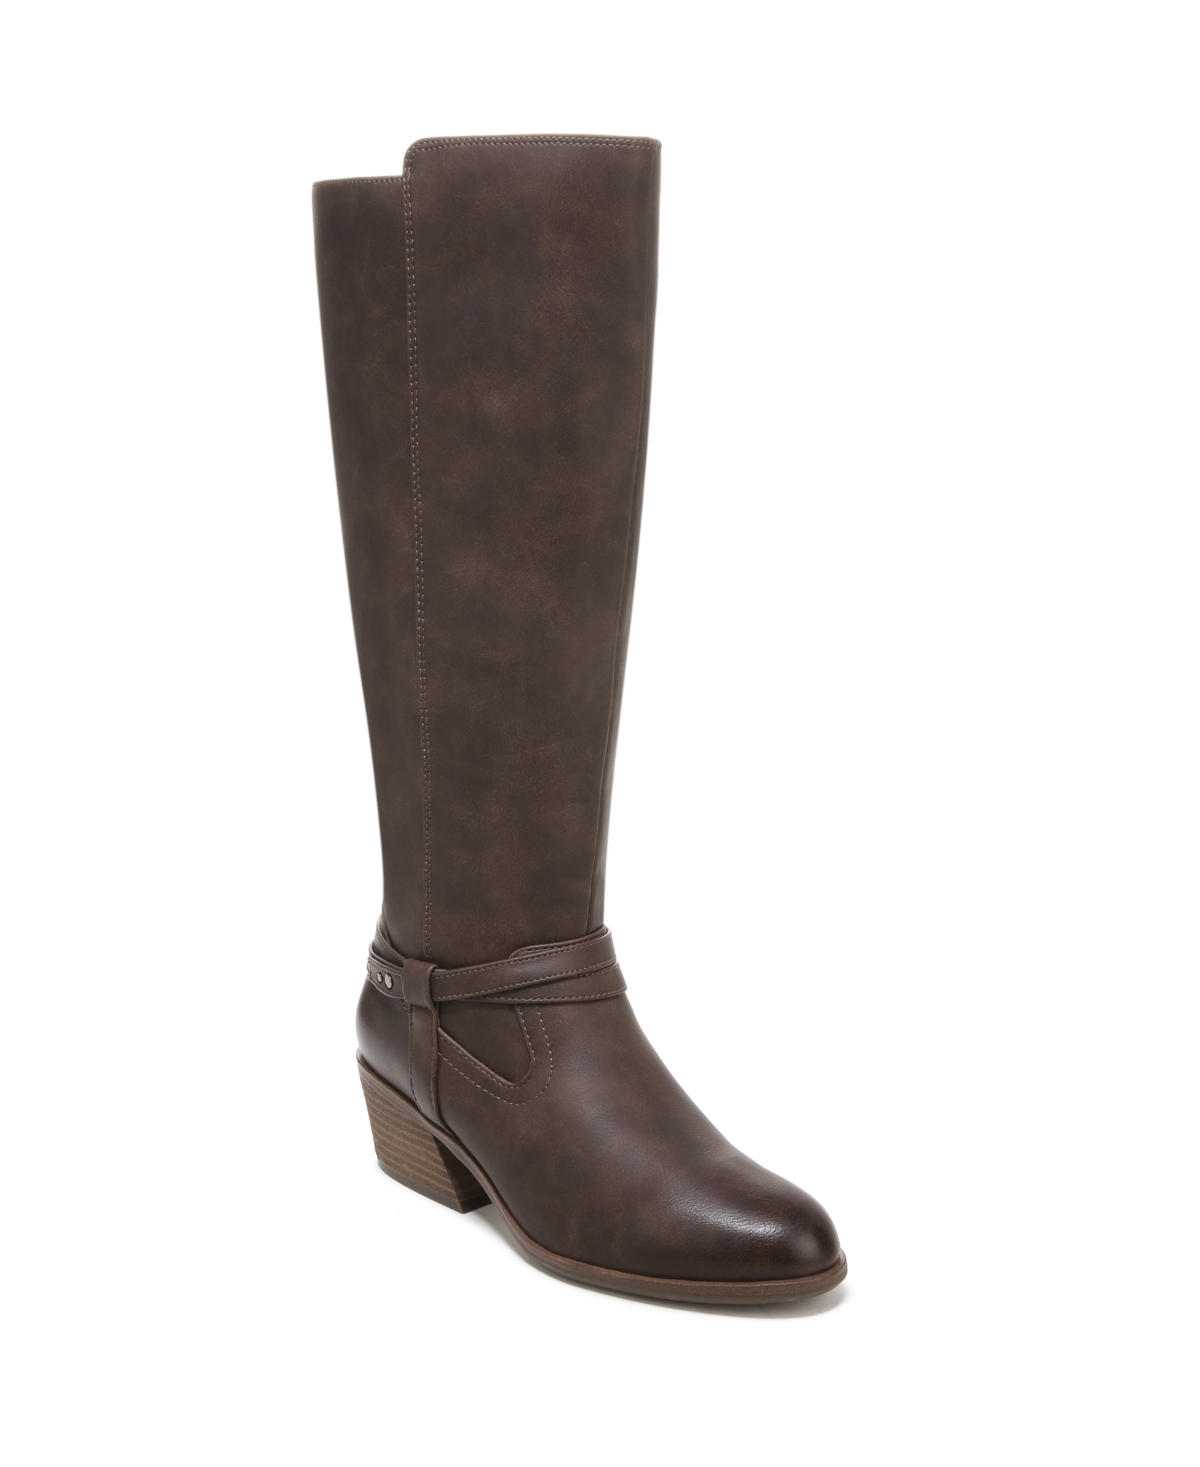 UPC 727687423068 product image for Dr. Scholl's Women's Liberate Wide Calf High Shaft Boots Women's Shoes | upcitemdb.com